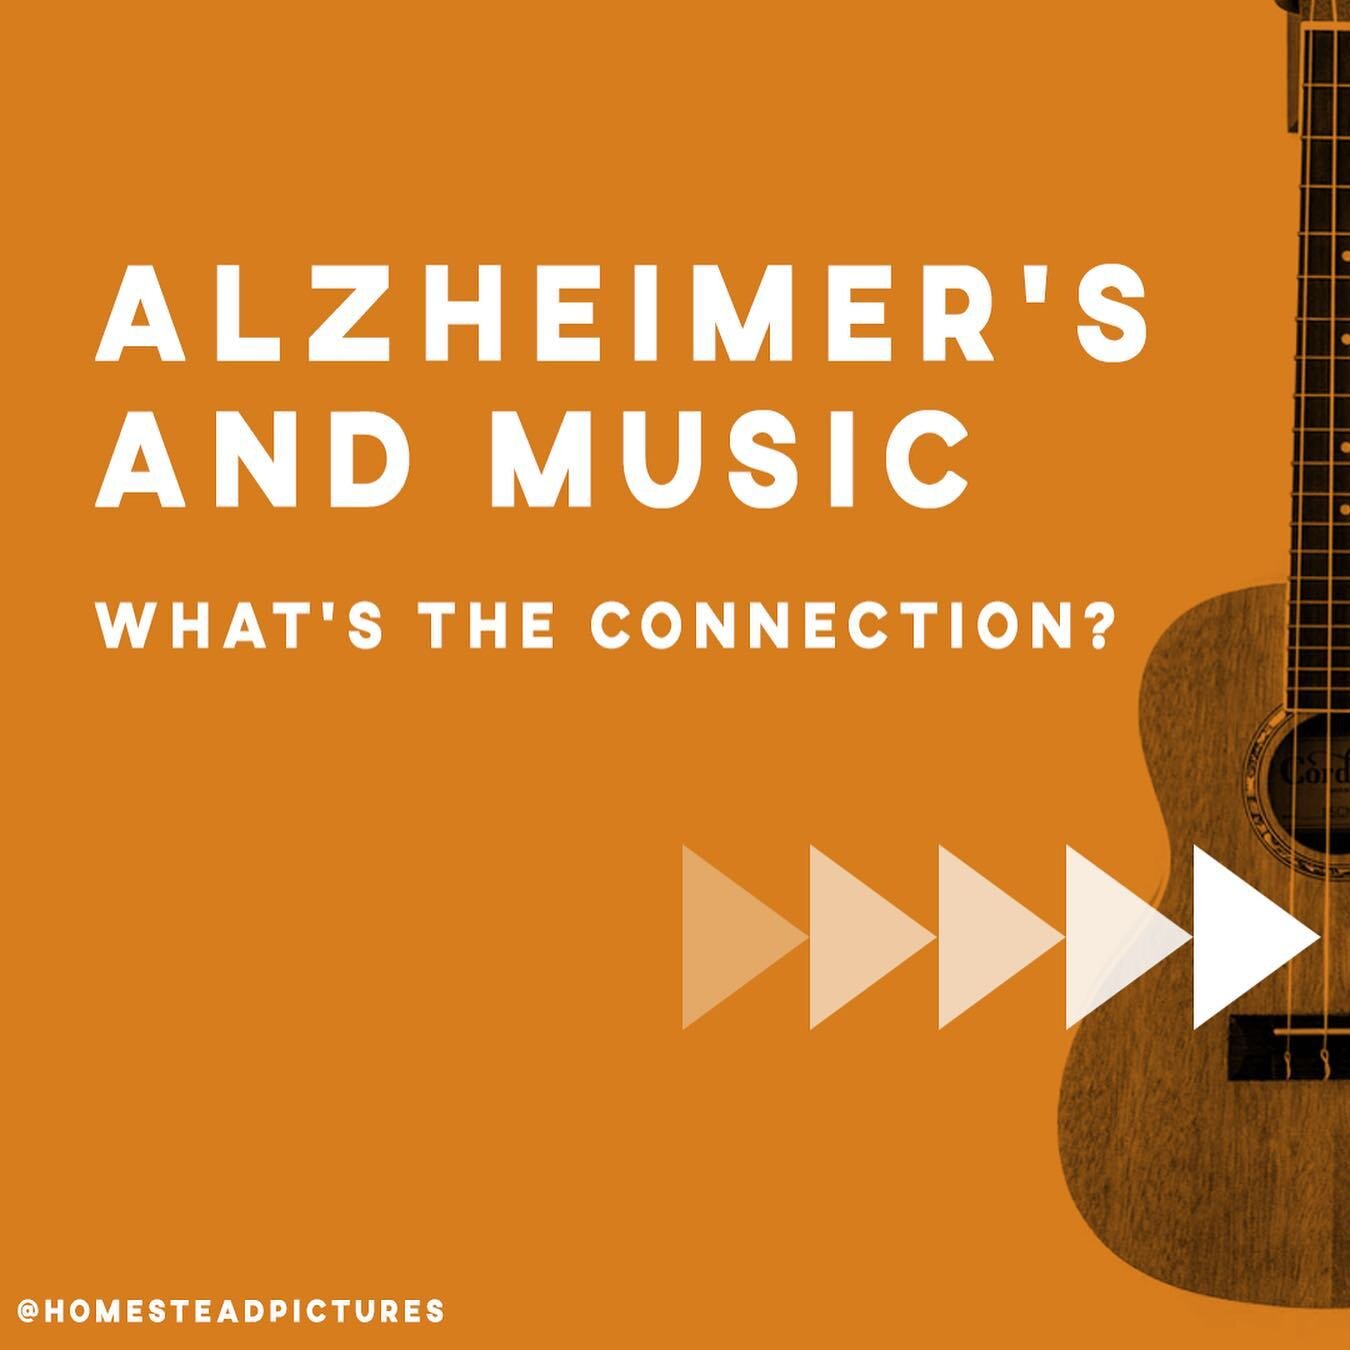 We&rsquo;ve gotten a few questions on how exactly music goes together with Alzheimer&rsquo;s. So we thought we&rsquo;d take the chance to put together an infographic to help explain! 
&mdash;
Music and music therapy plays a huge role in the story of 